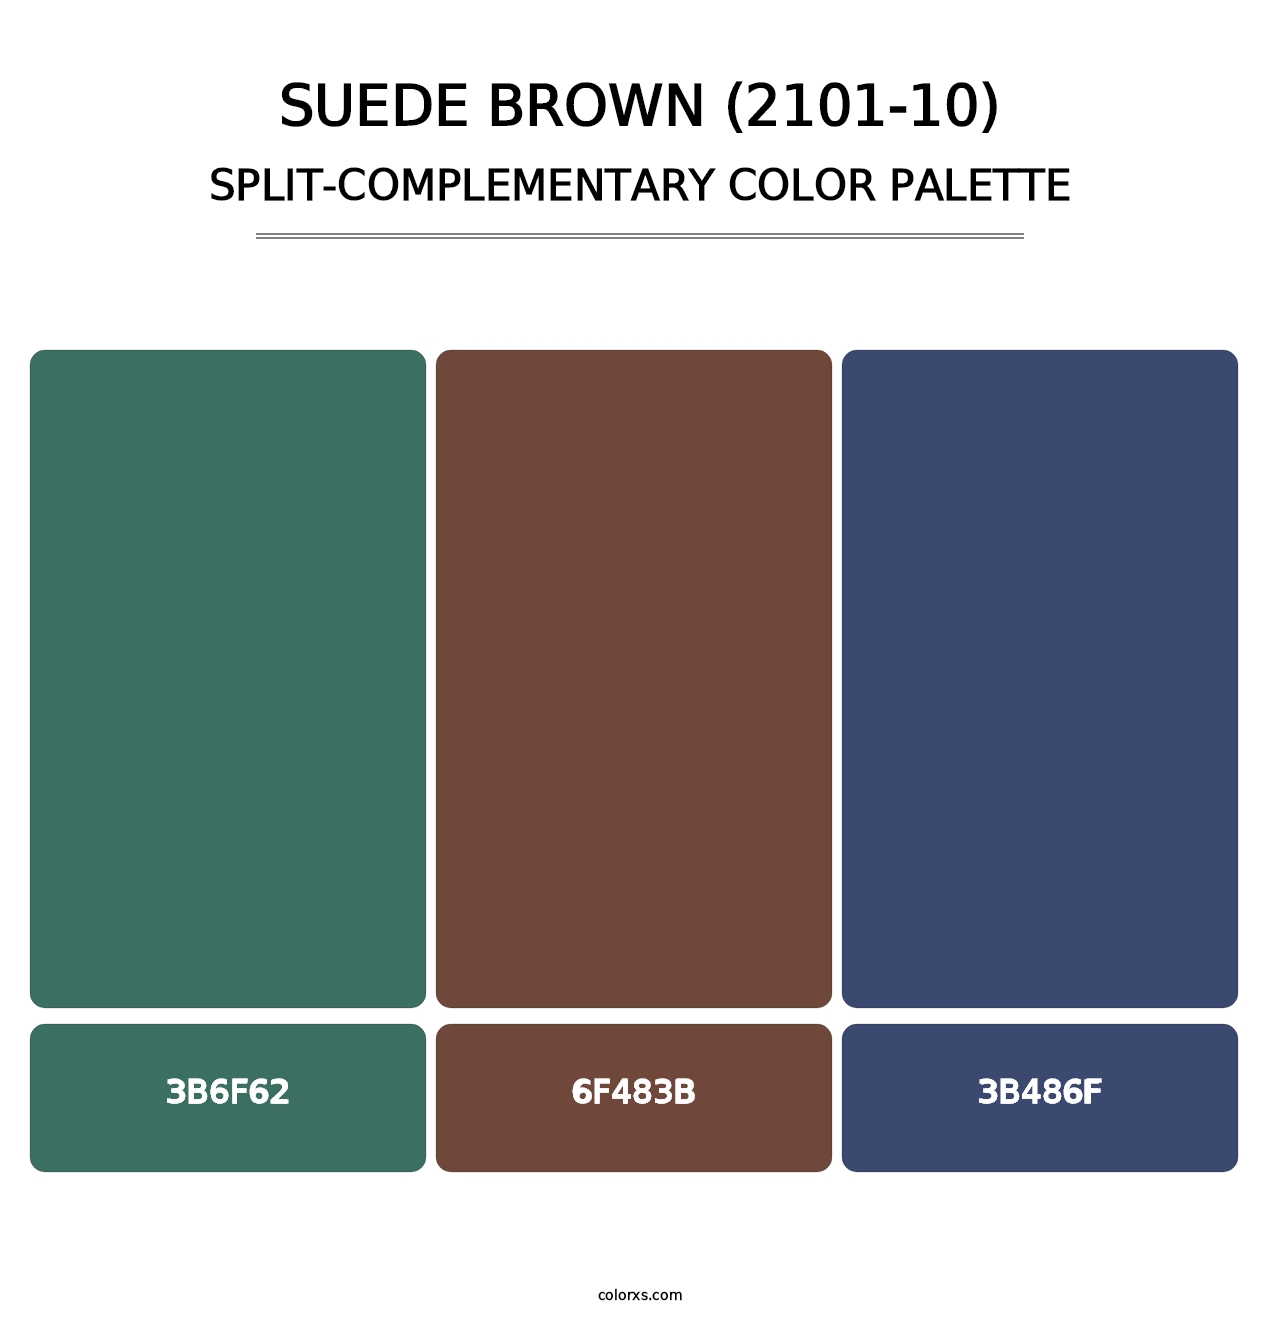 Suede Brown (2101-10) - Split-Complementary Color Palette